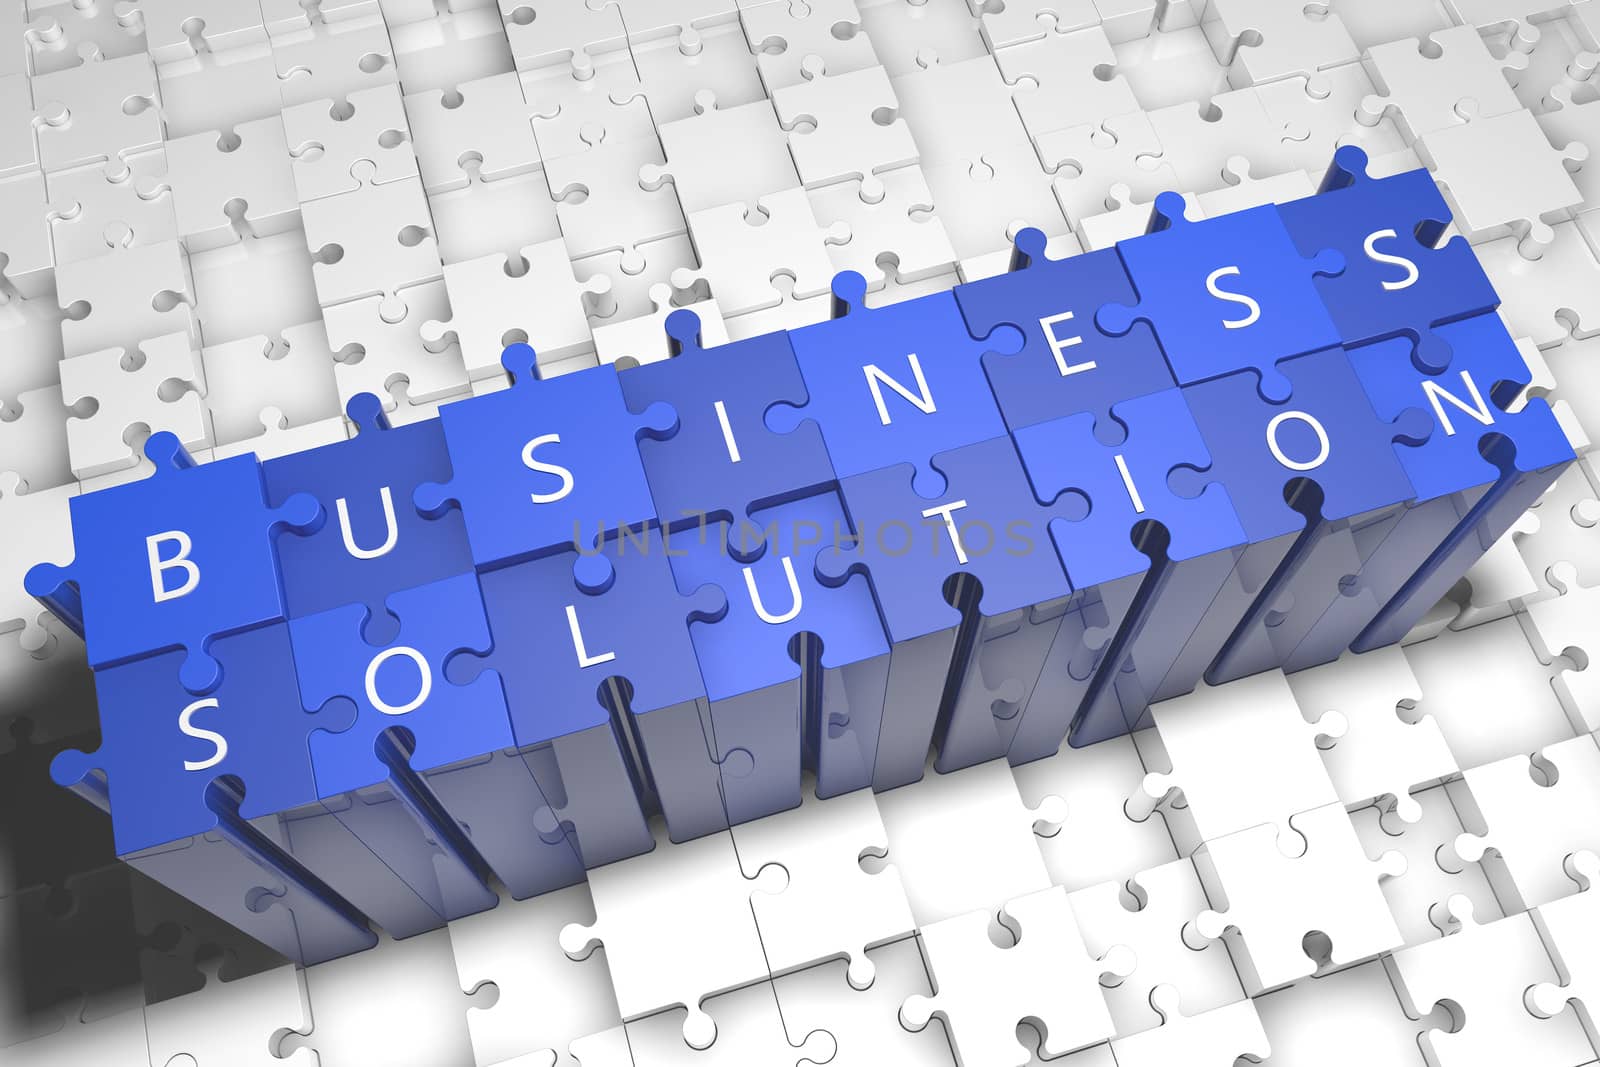 Business Solution - puzzle 3d render illustration with text on blue jigsaw pieces stick out of white pieces